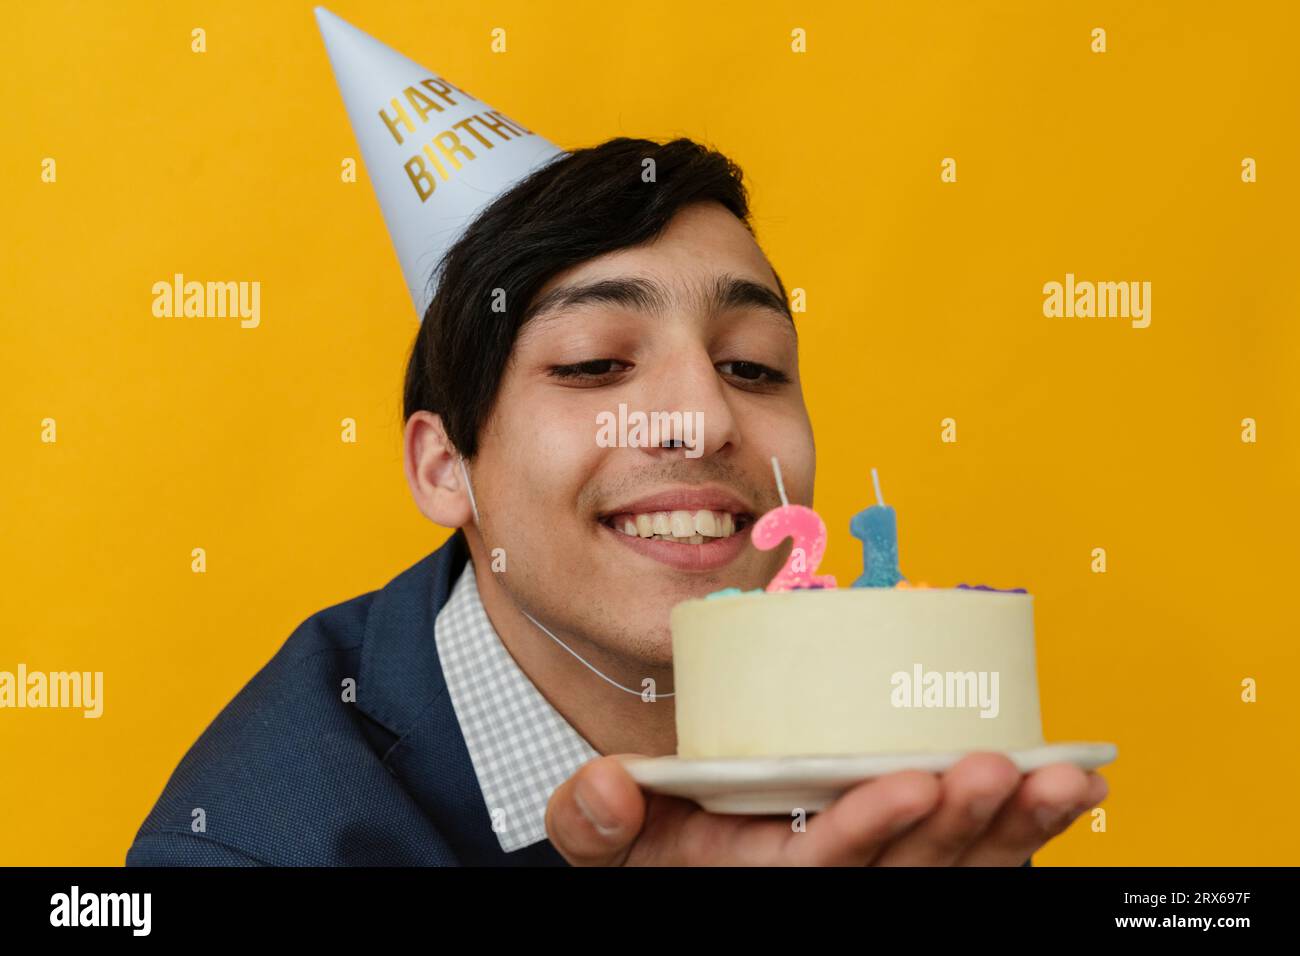 Happy man with party hat looking at 21st birthday cake Stock Photo